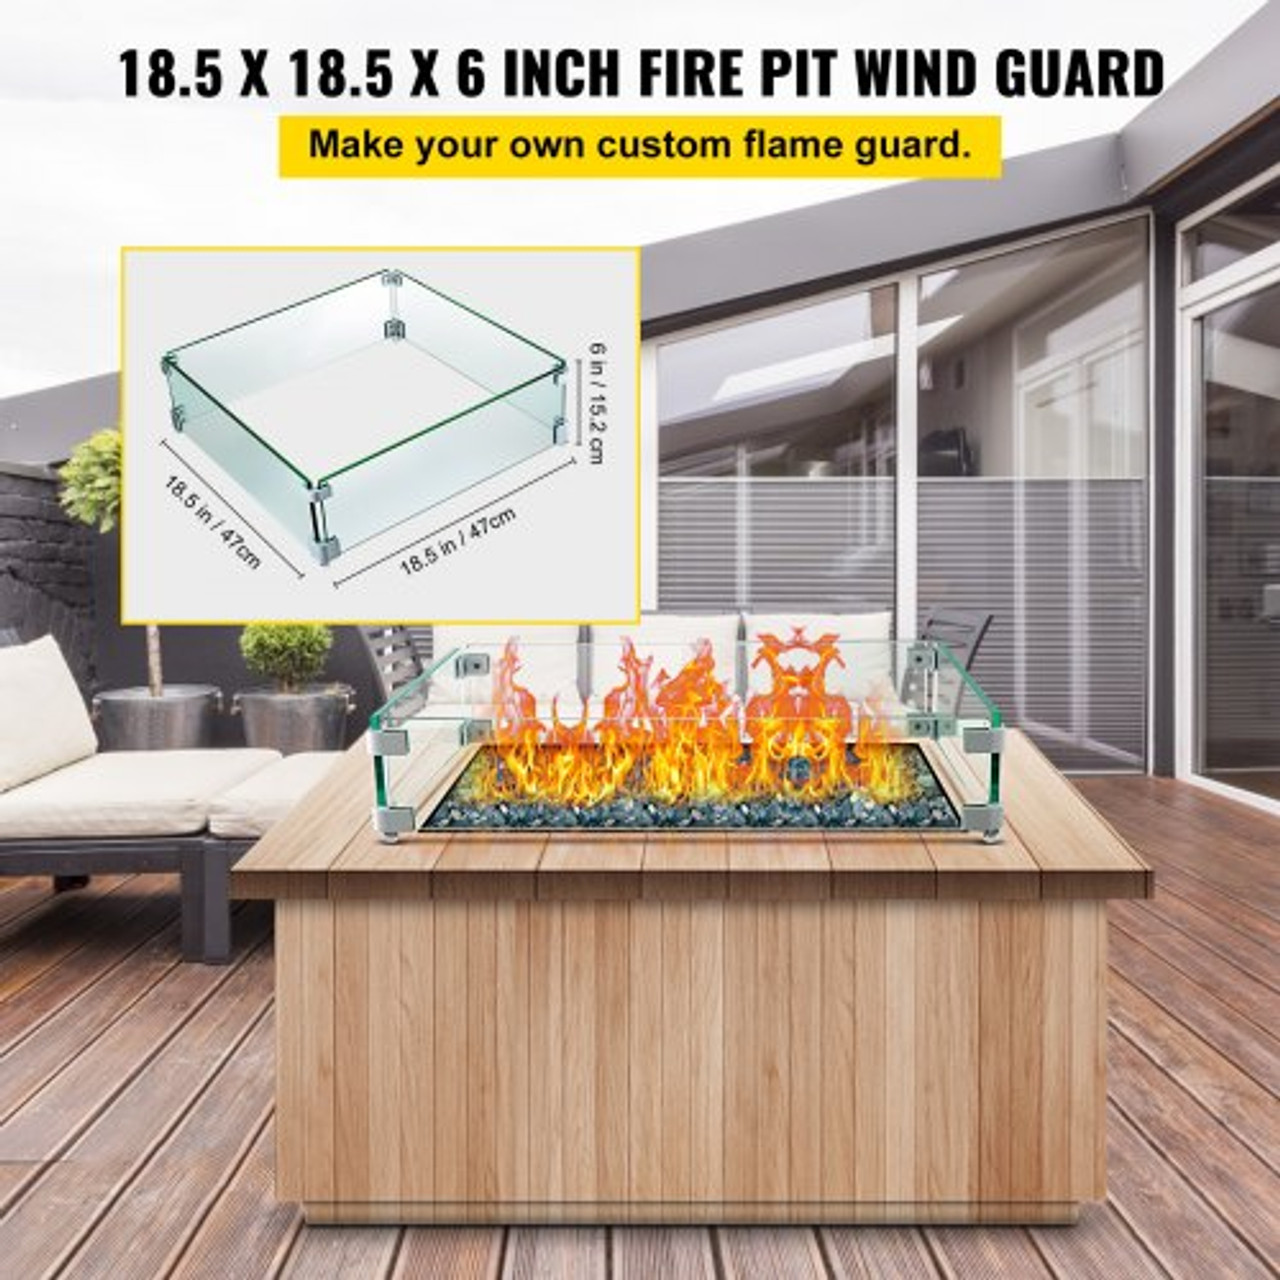 Square Fire Pit Wind Guard, 19" x 19" x 6" Glass Flame Guard, Fire Wind Guard Fence with 5/16 Inch Thickness Clear Tempered Glass and Non-Slip Feet, for Propane, Gas, Fire Pits Pan/Table